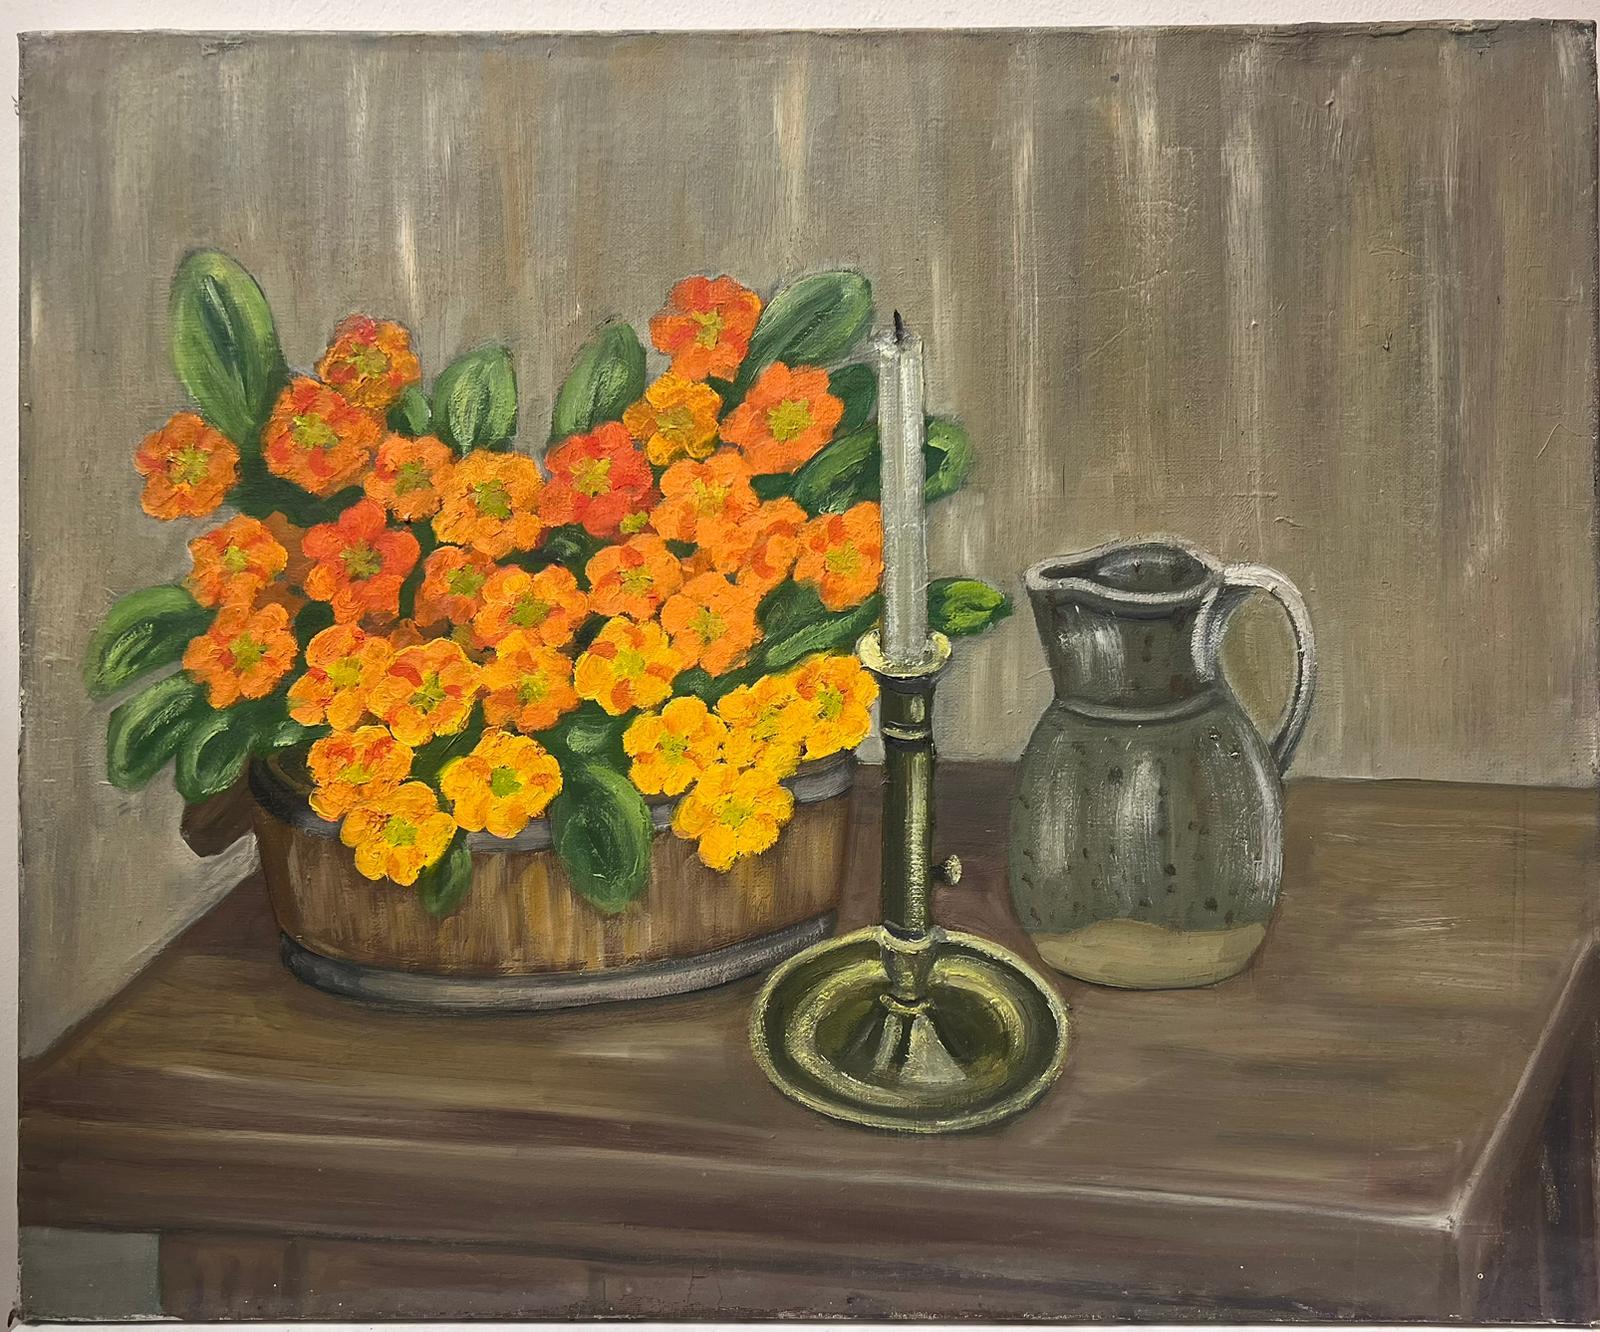 Orange Pansies Interior
oil on canvas, unframed
canvas: 20 x 24 inches
provenance: private collection
condition: very good and sound condition 